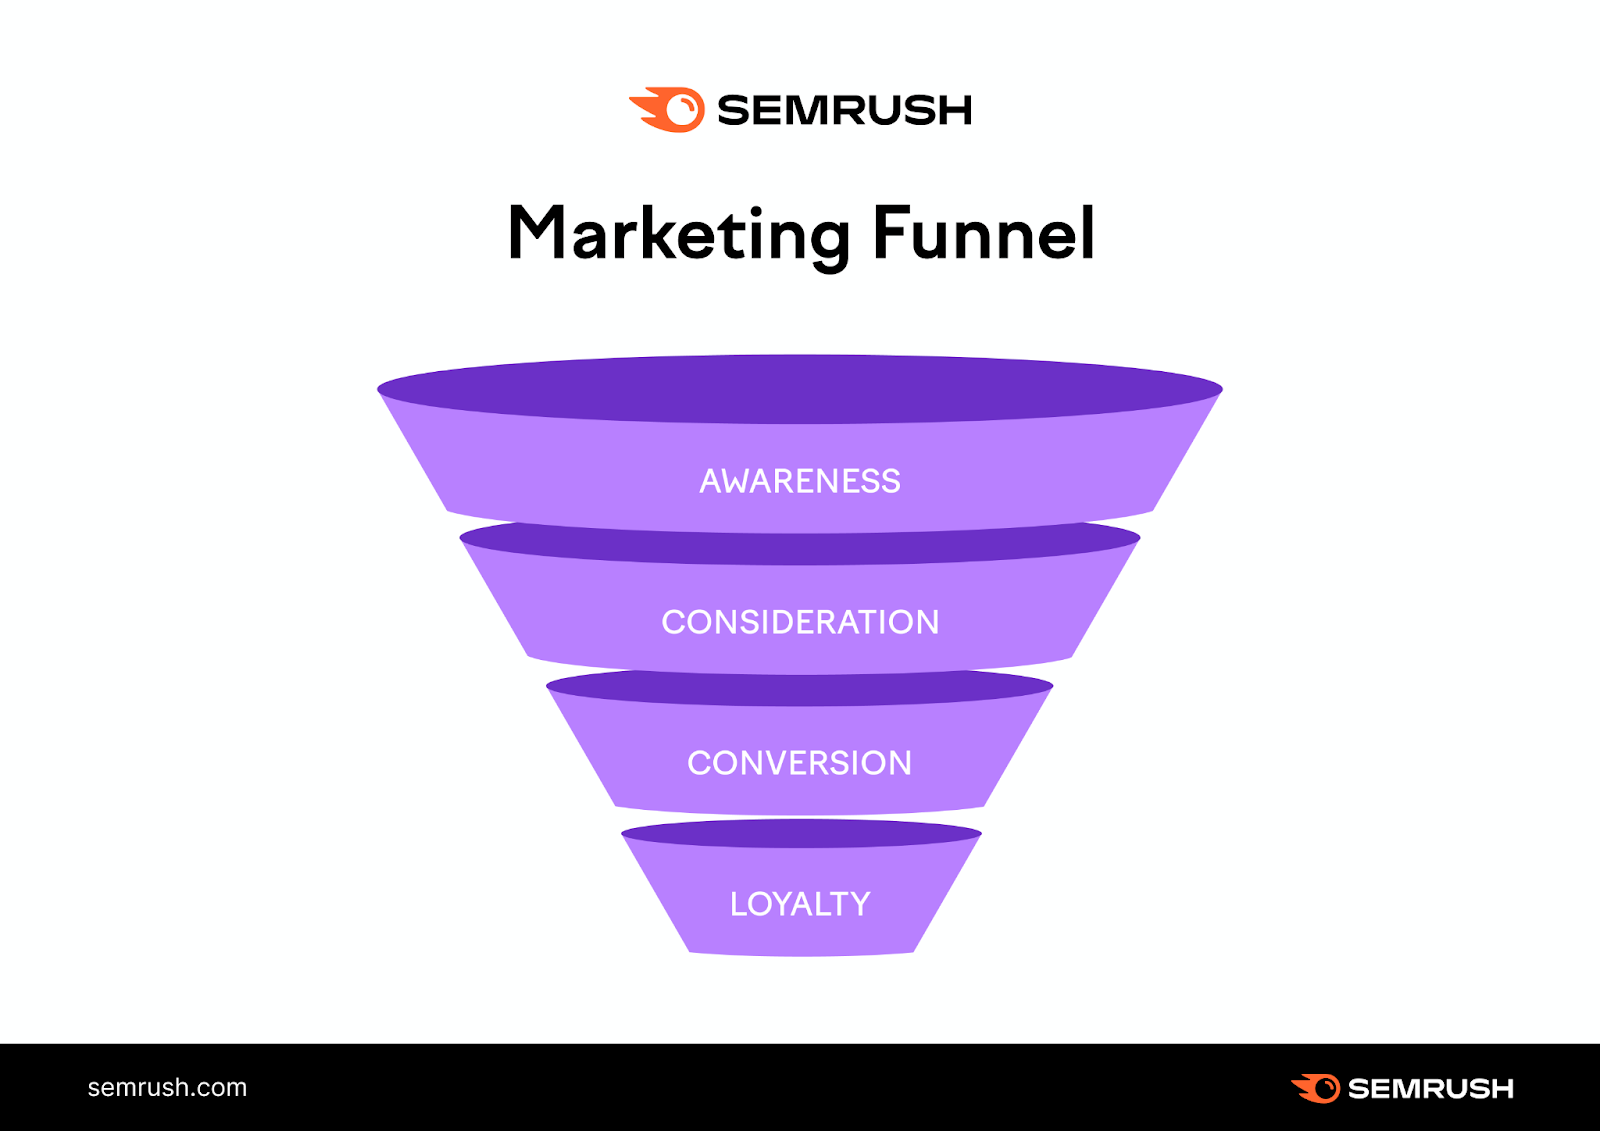 A visual of marketing funnel, with awareness, consideration, conversion and loyalty stages